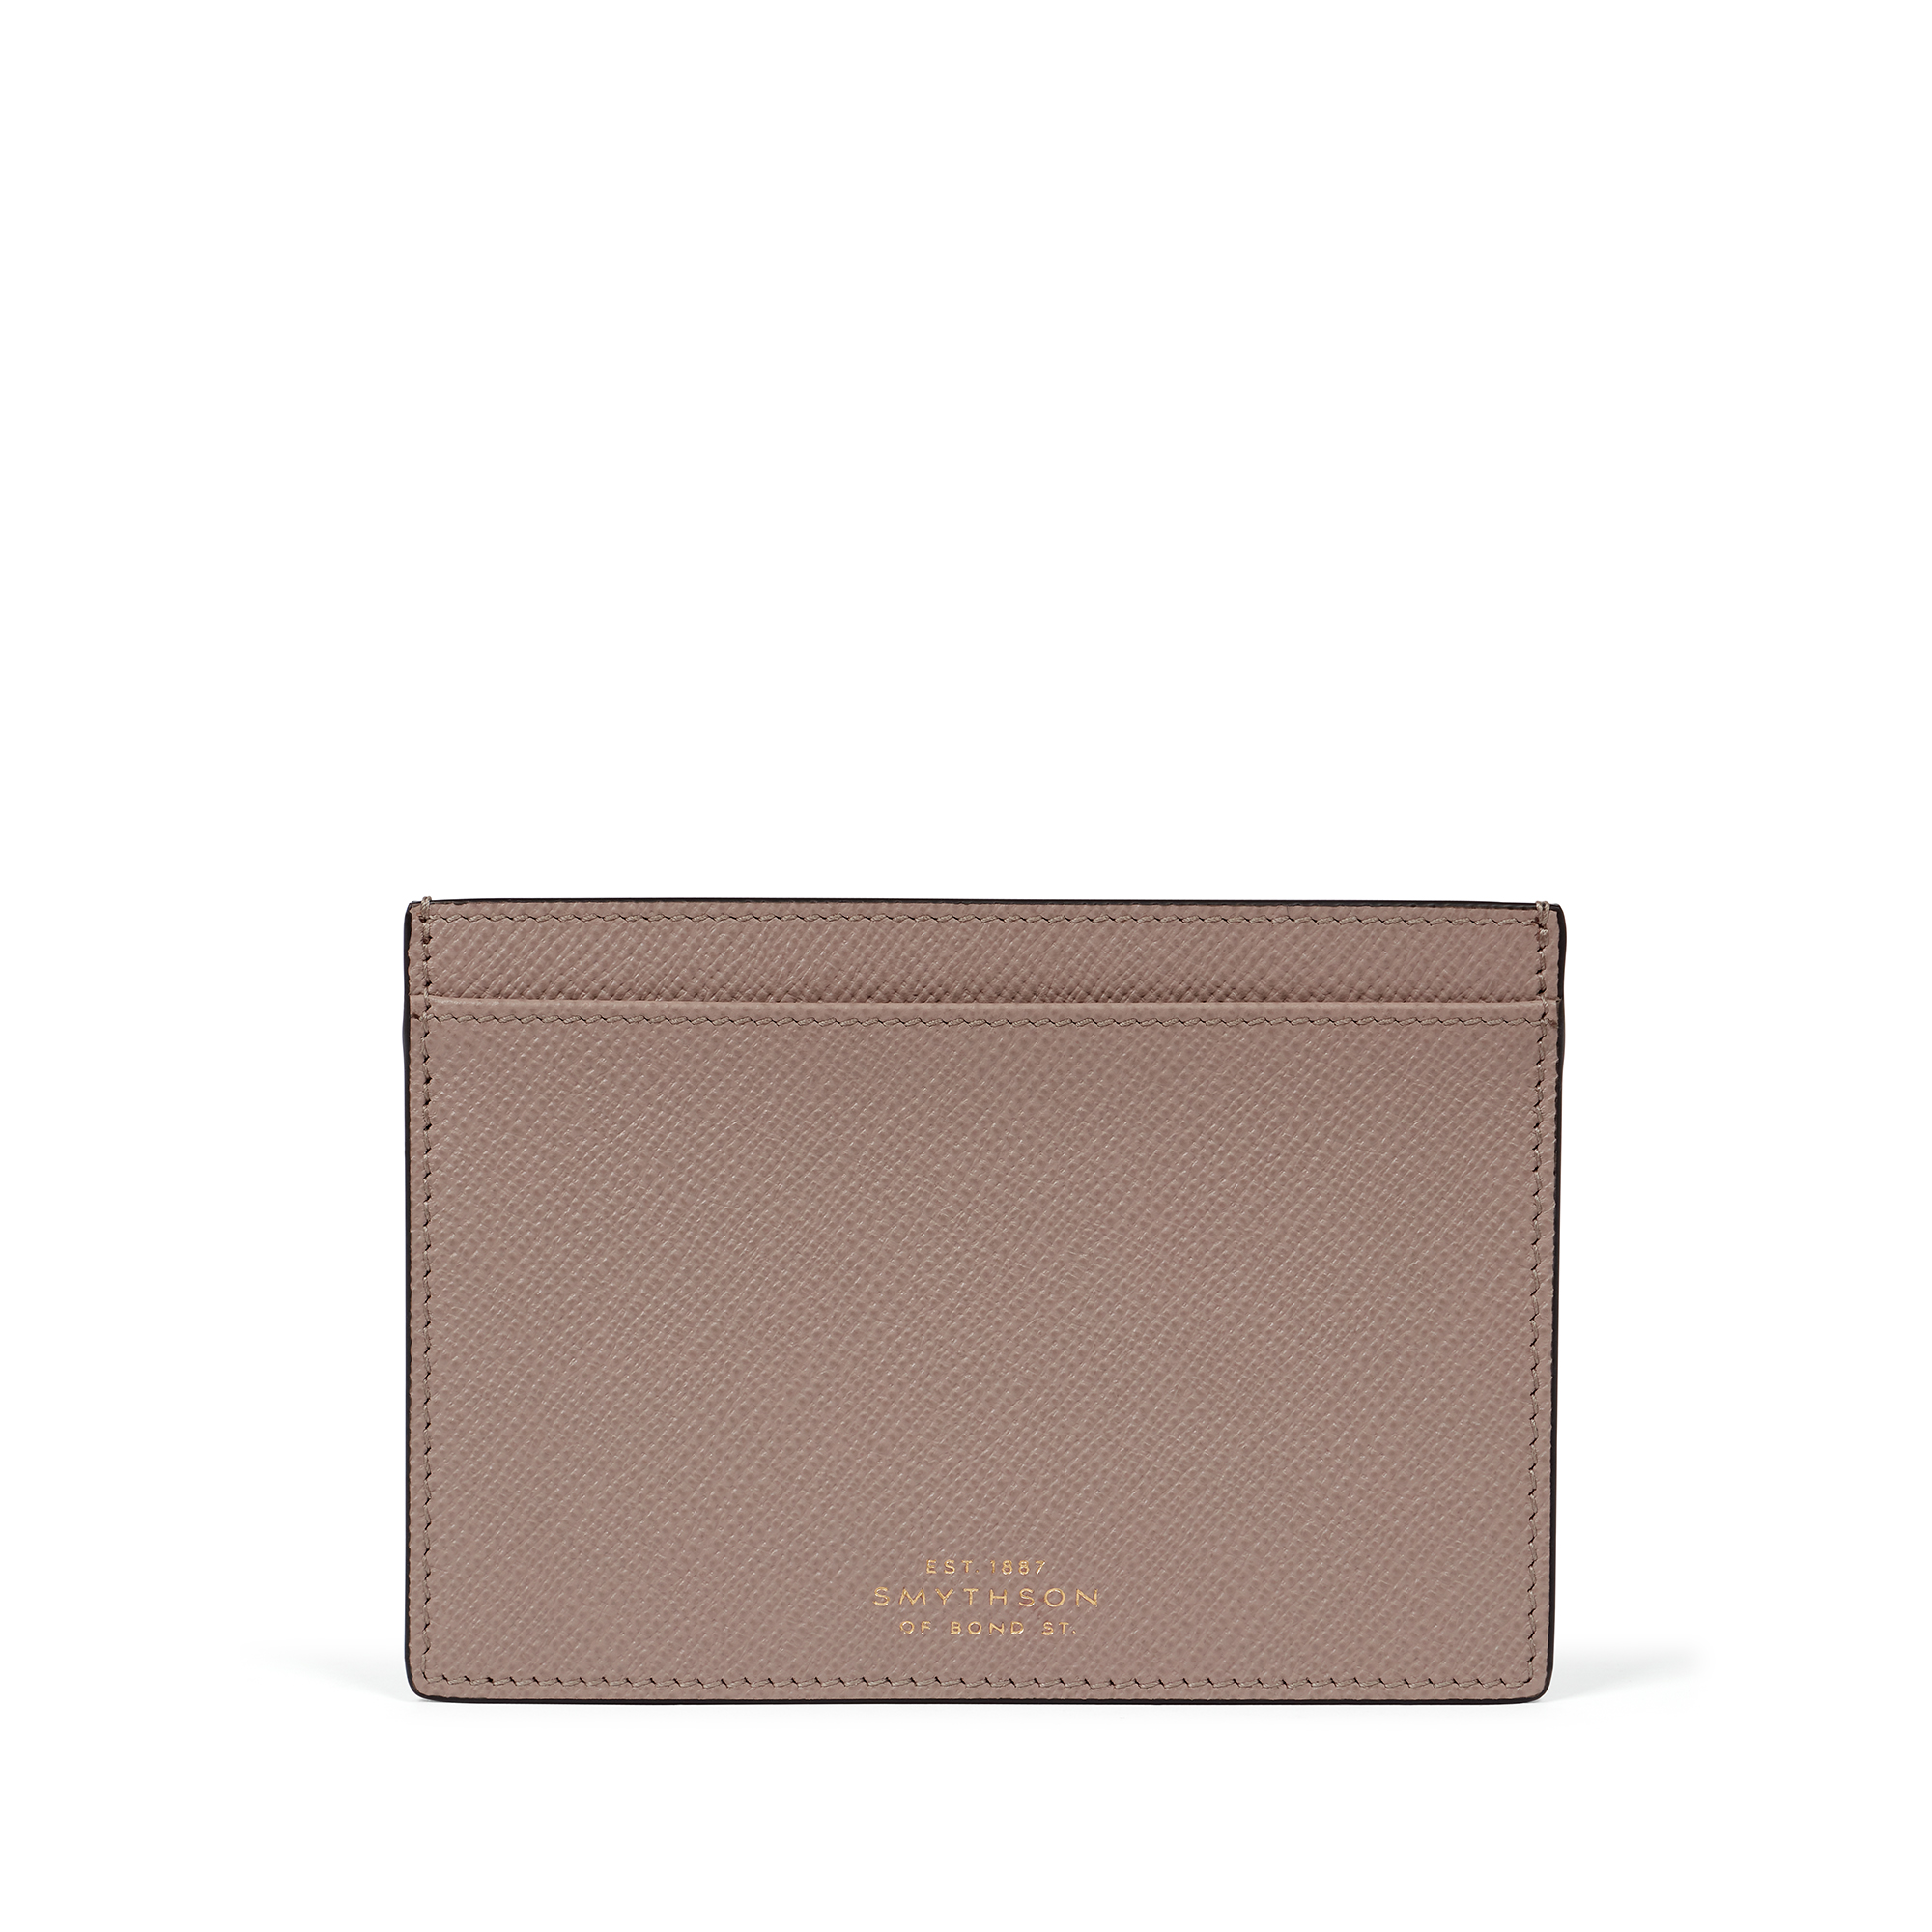 Smythson Passport Sleeve In Panama In Taupe